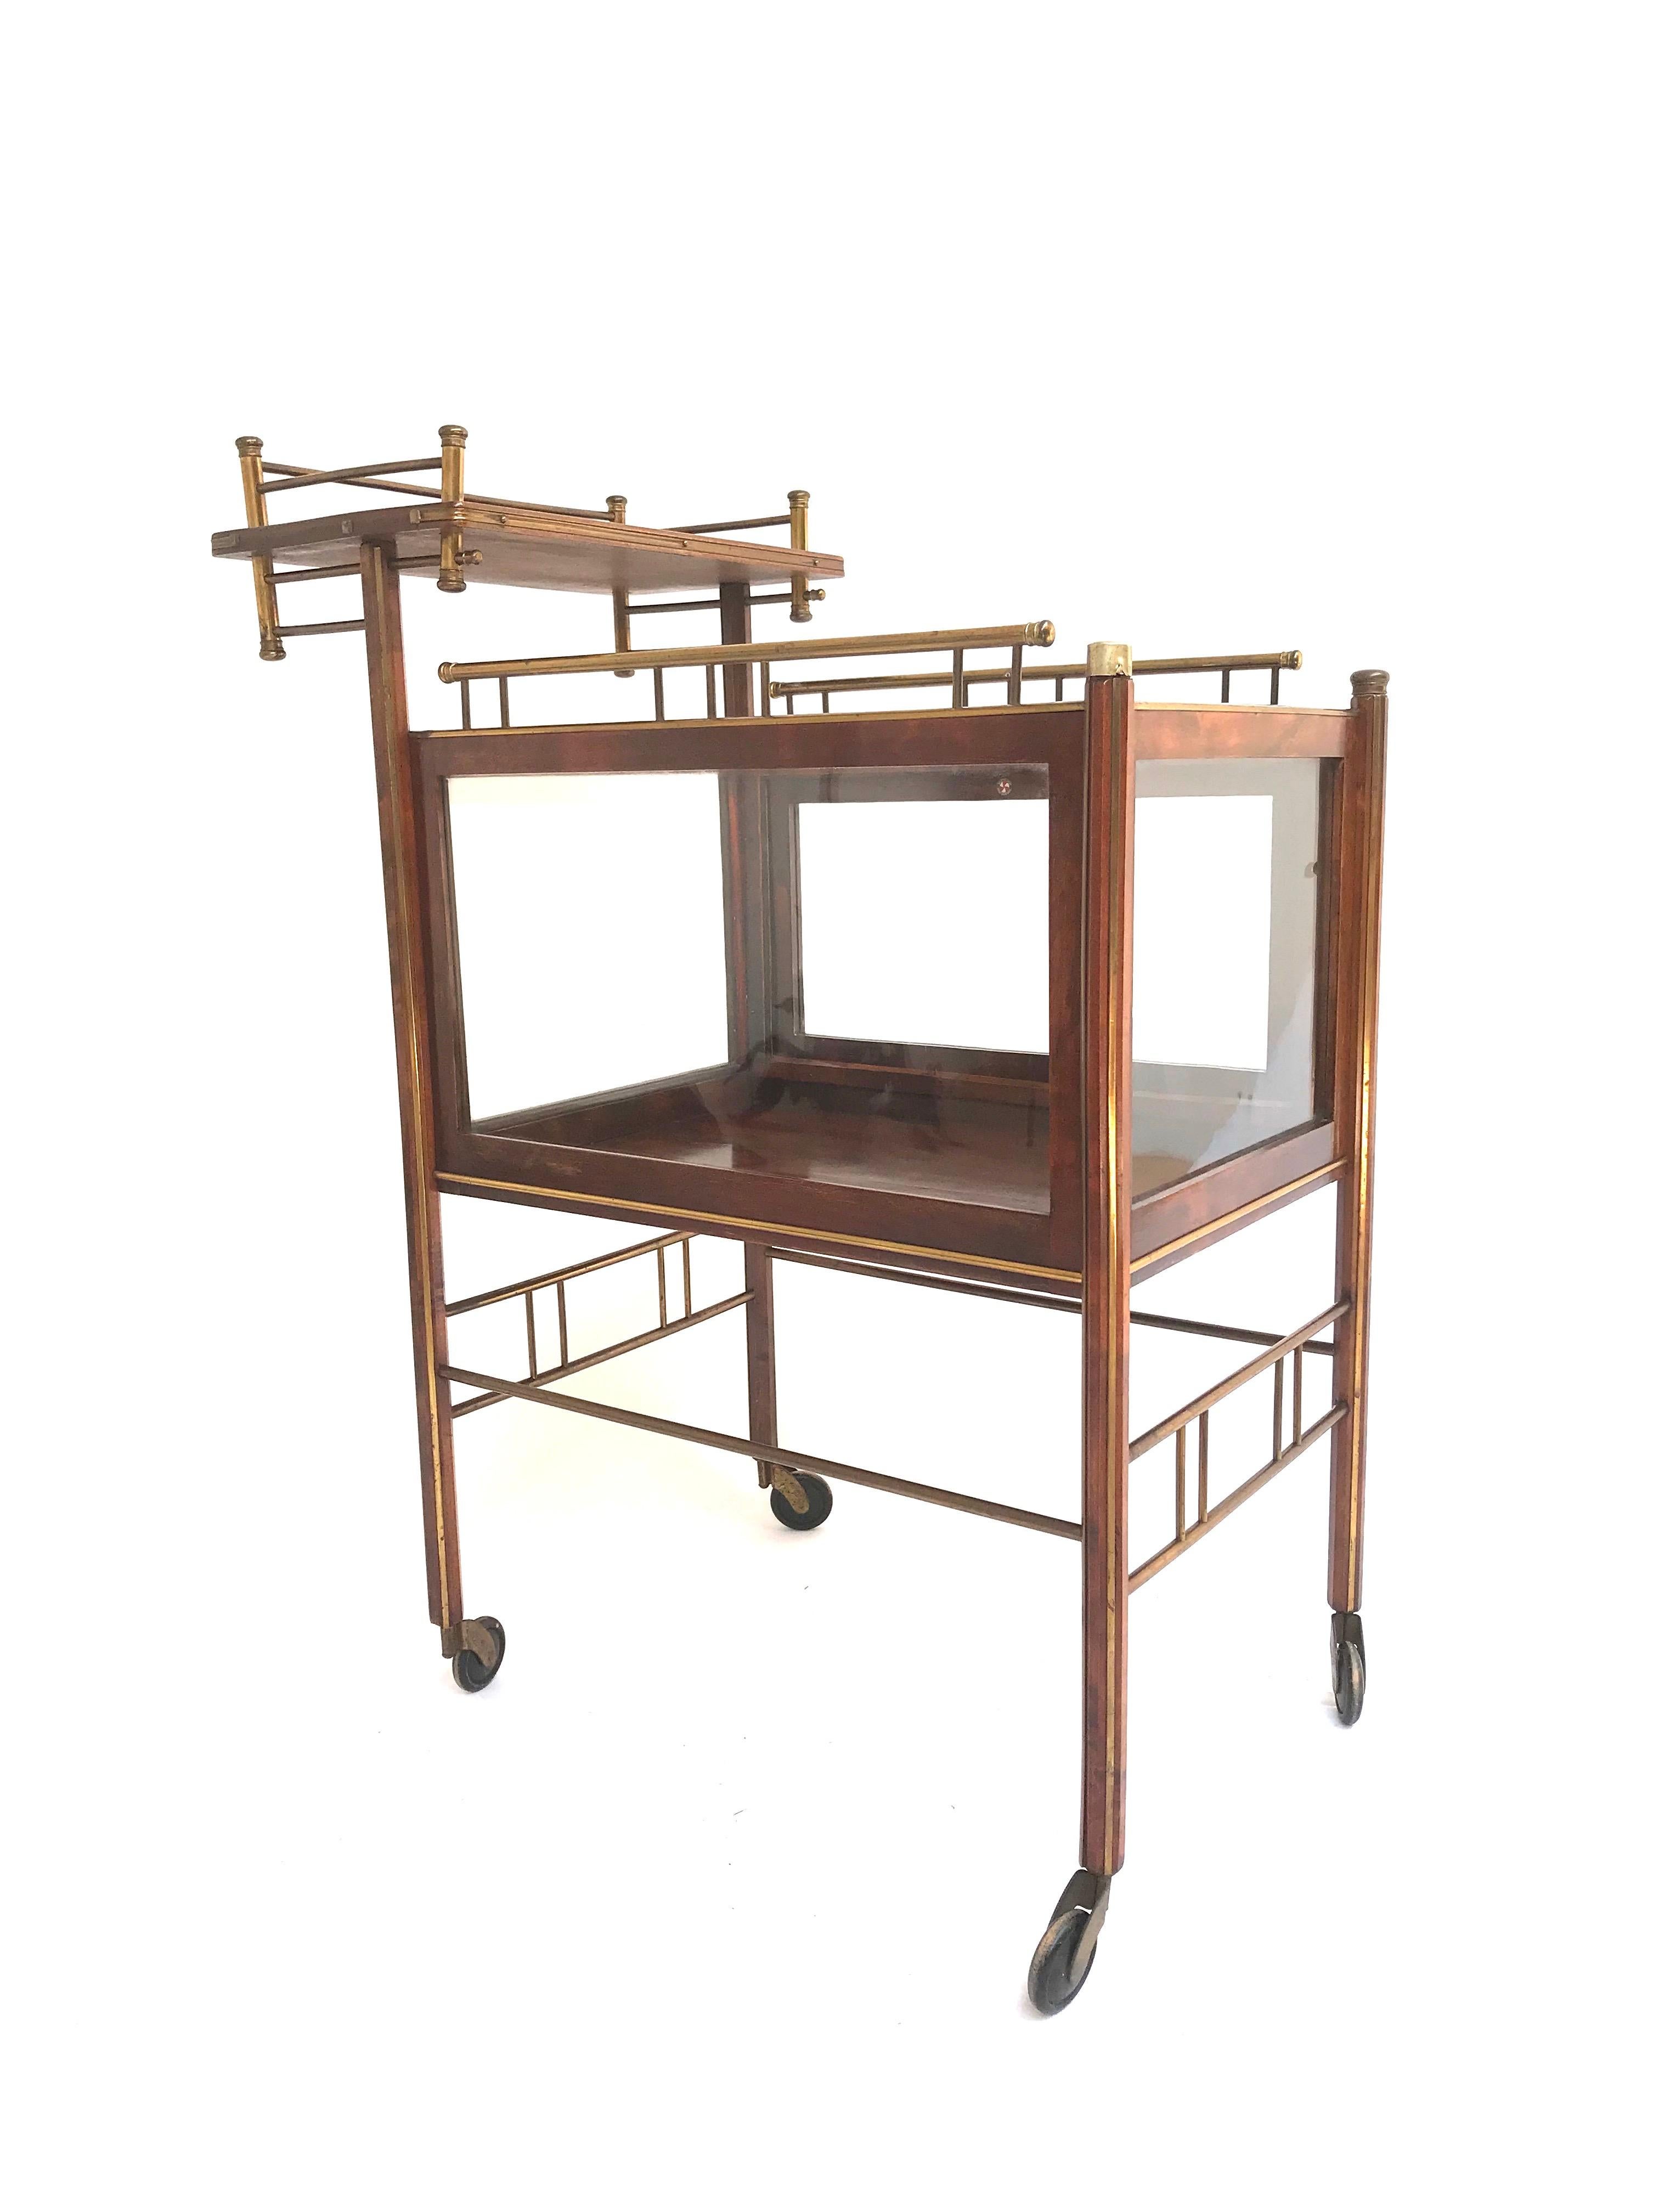 Modernist design Arts & Crafts drinks cart by Ernst Rockhausen of Waldheim, Germany.

Design-wise this one of a kind drinks trolley on its original wooden wheels is truly remarkable. The asymmetrical shape with its extra tier, for placing some